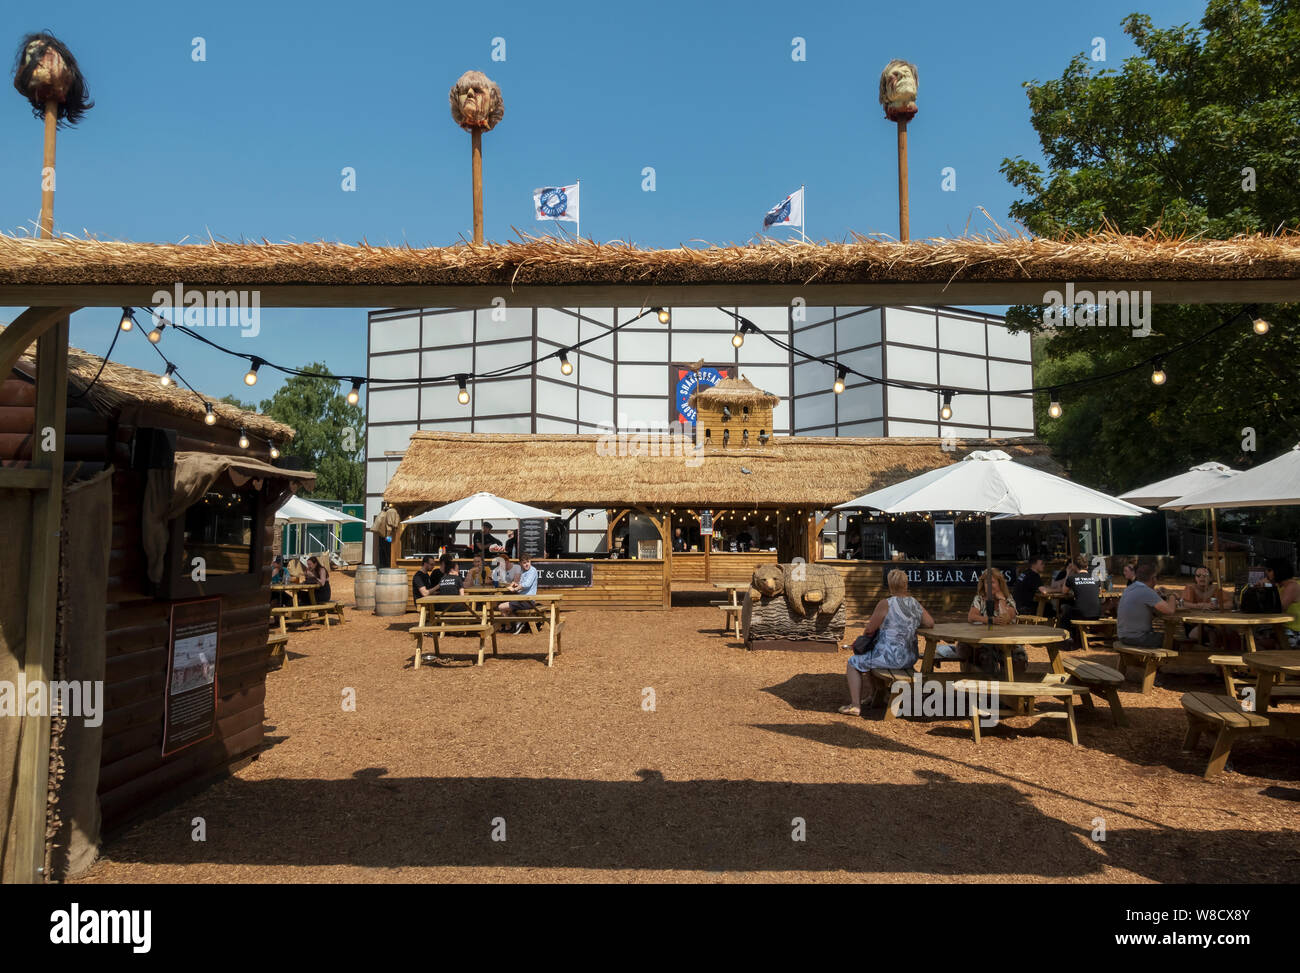 Entrance to Shakespeare's Rose Theatre and village food stalls York North Yorkshire England UK United Kingdom GB Great Britain Stock Photo